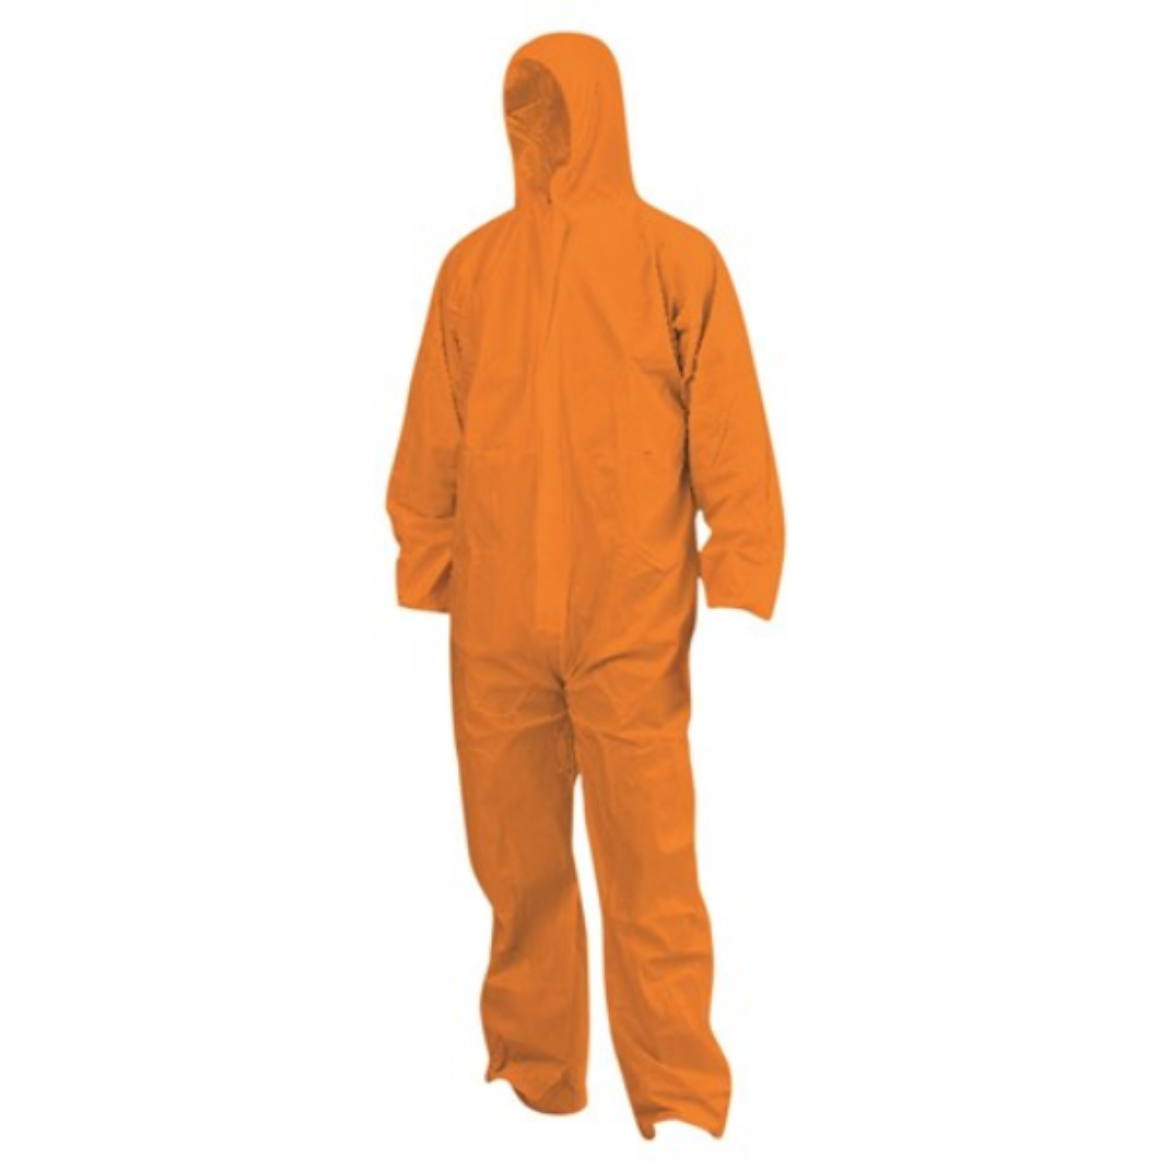 Picture of DISPOSABLE SMS COVERALL - ORANGE. AVAILABLE IN SIZES M/L/XL/2XL/3XL/4XL